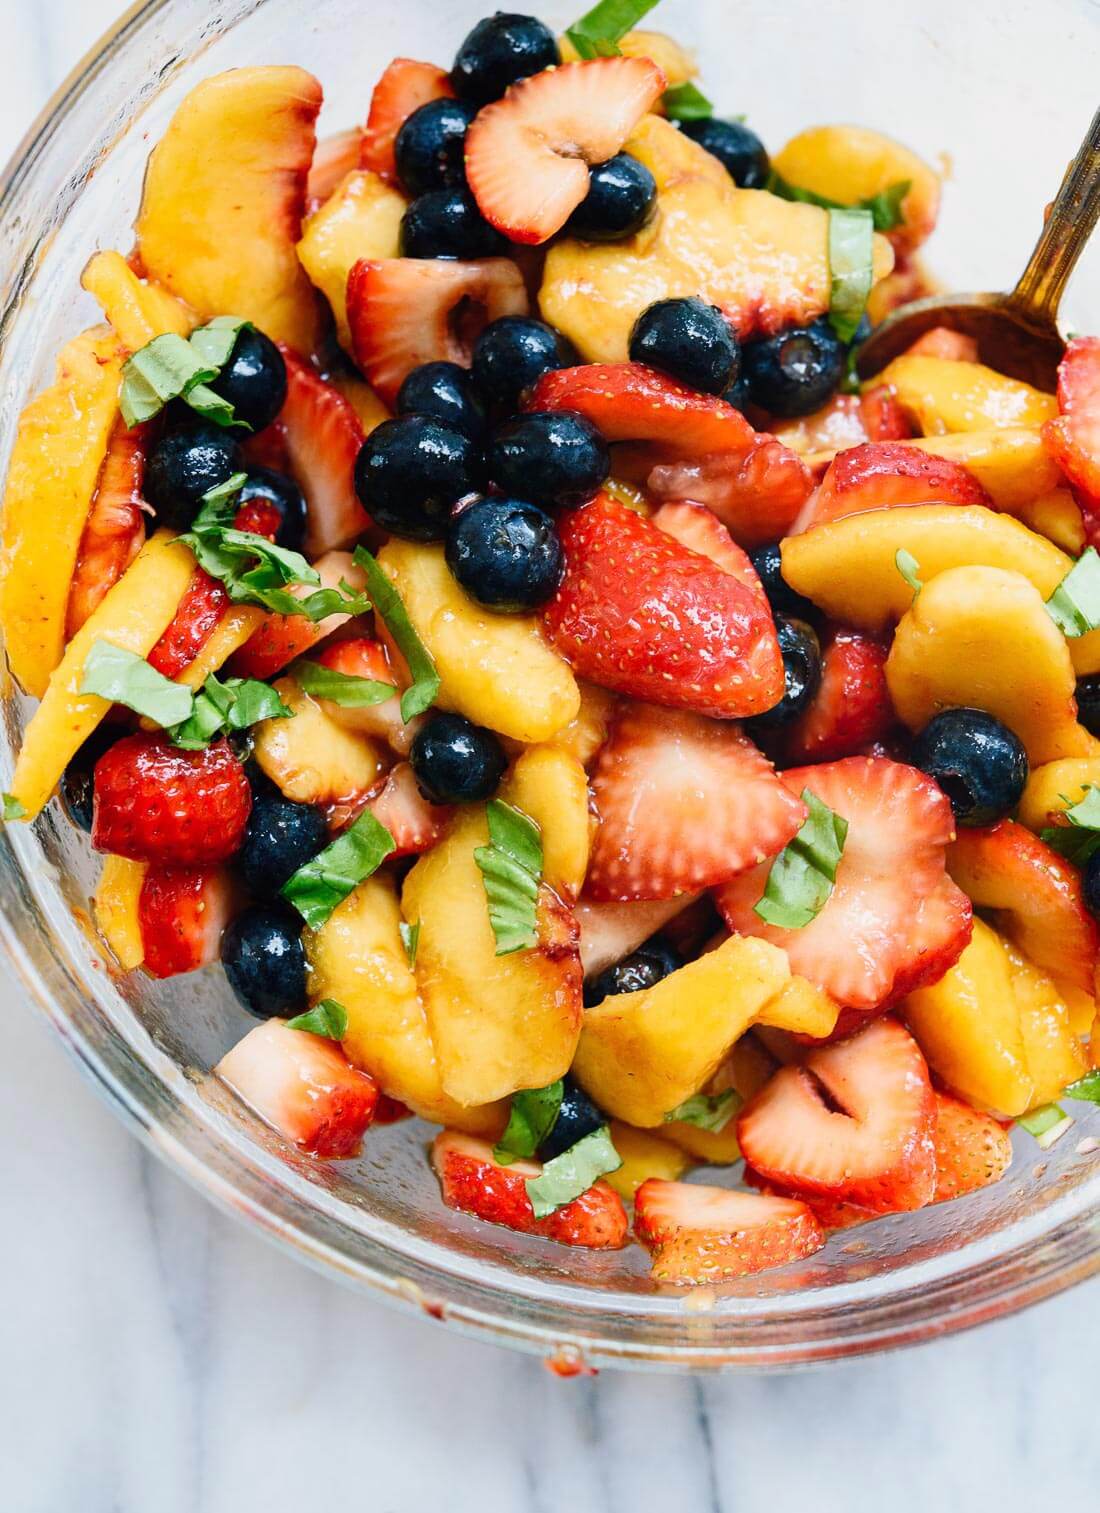 Take advantage of ripe summer fruit to make this simple summer fruit salad! Peaches, strawberries, blueberries, and balsamic vinegar make a stellar fruit salad. cookieandkate.com